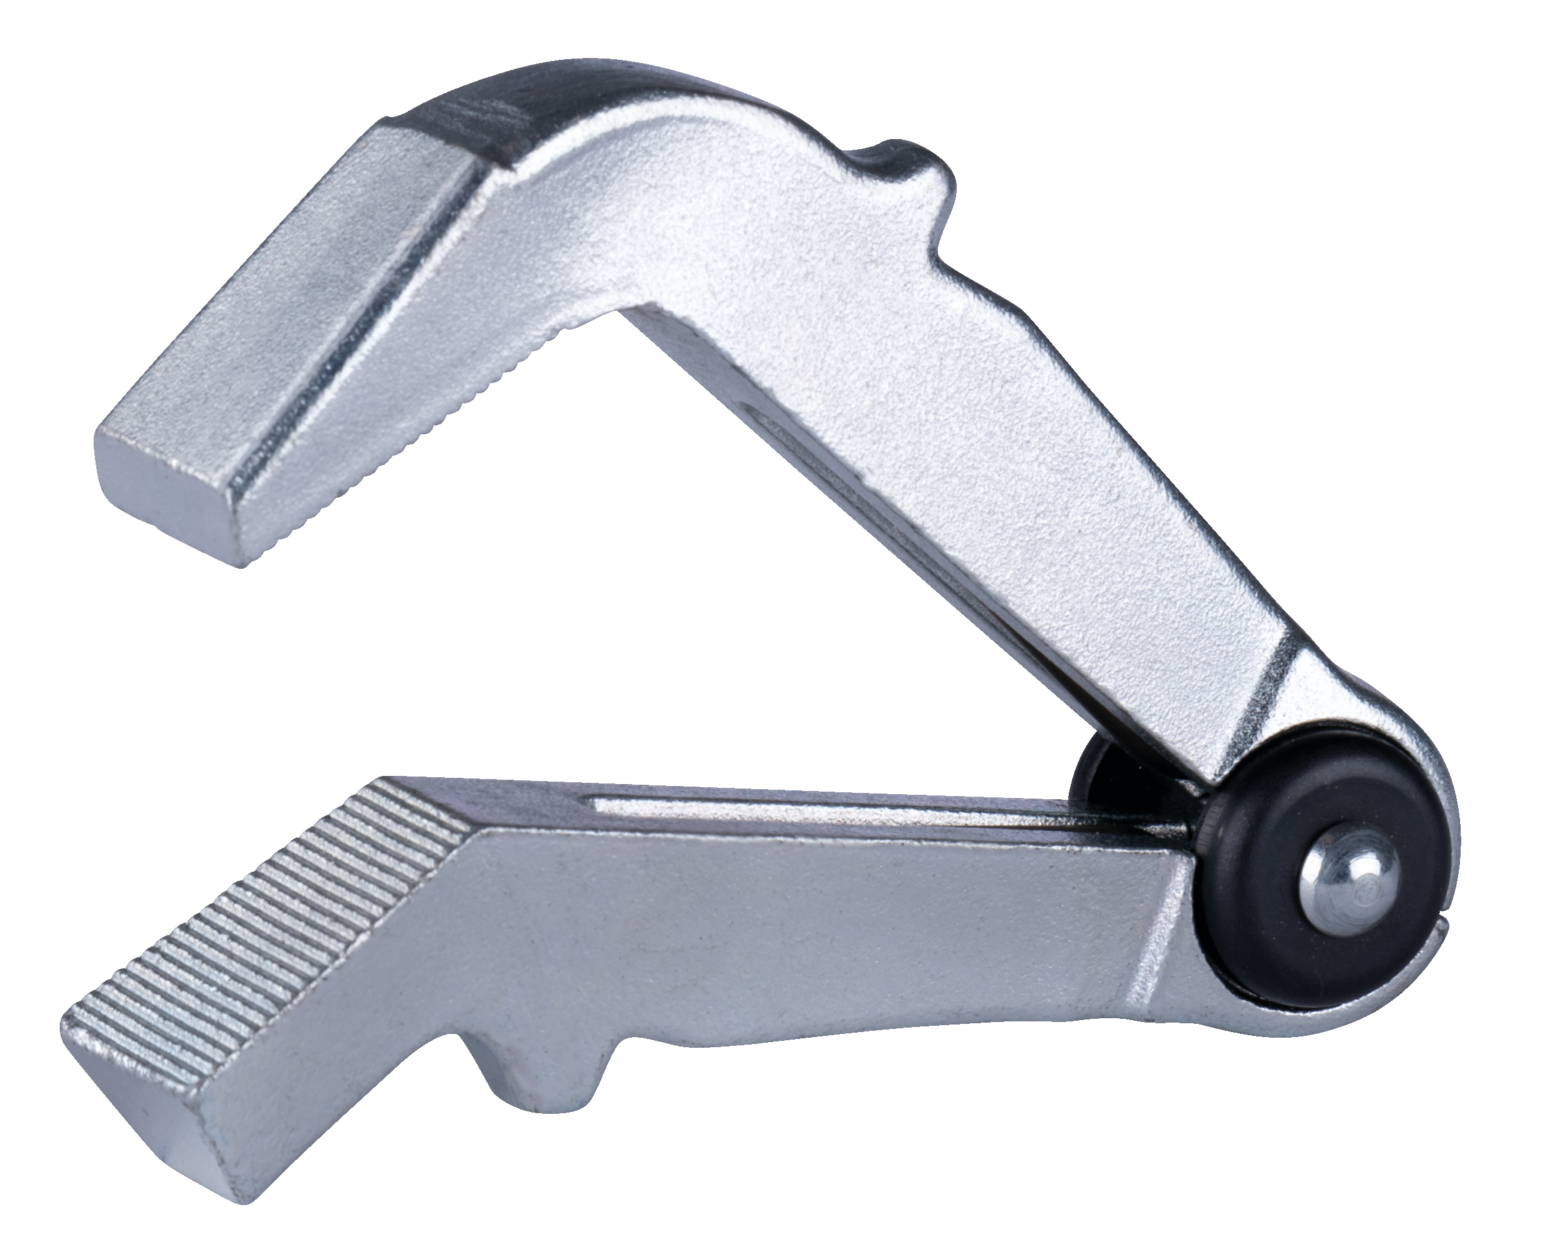 A tyre clamp of the 112-1 series for clamping tyres of barrels, saw blades during sharpening, etc.